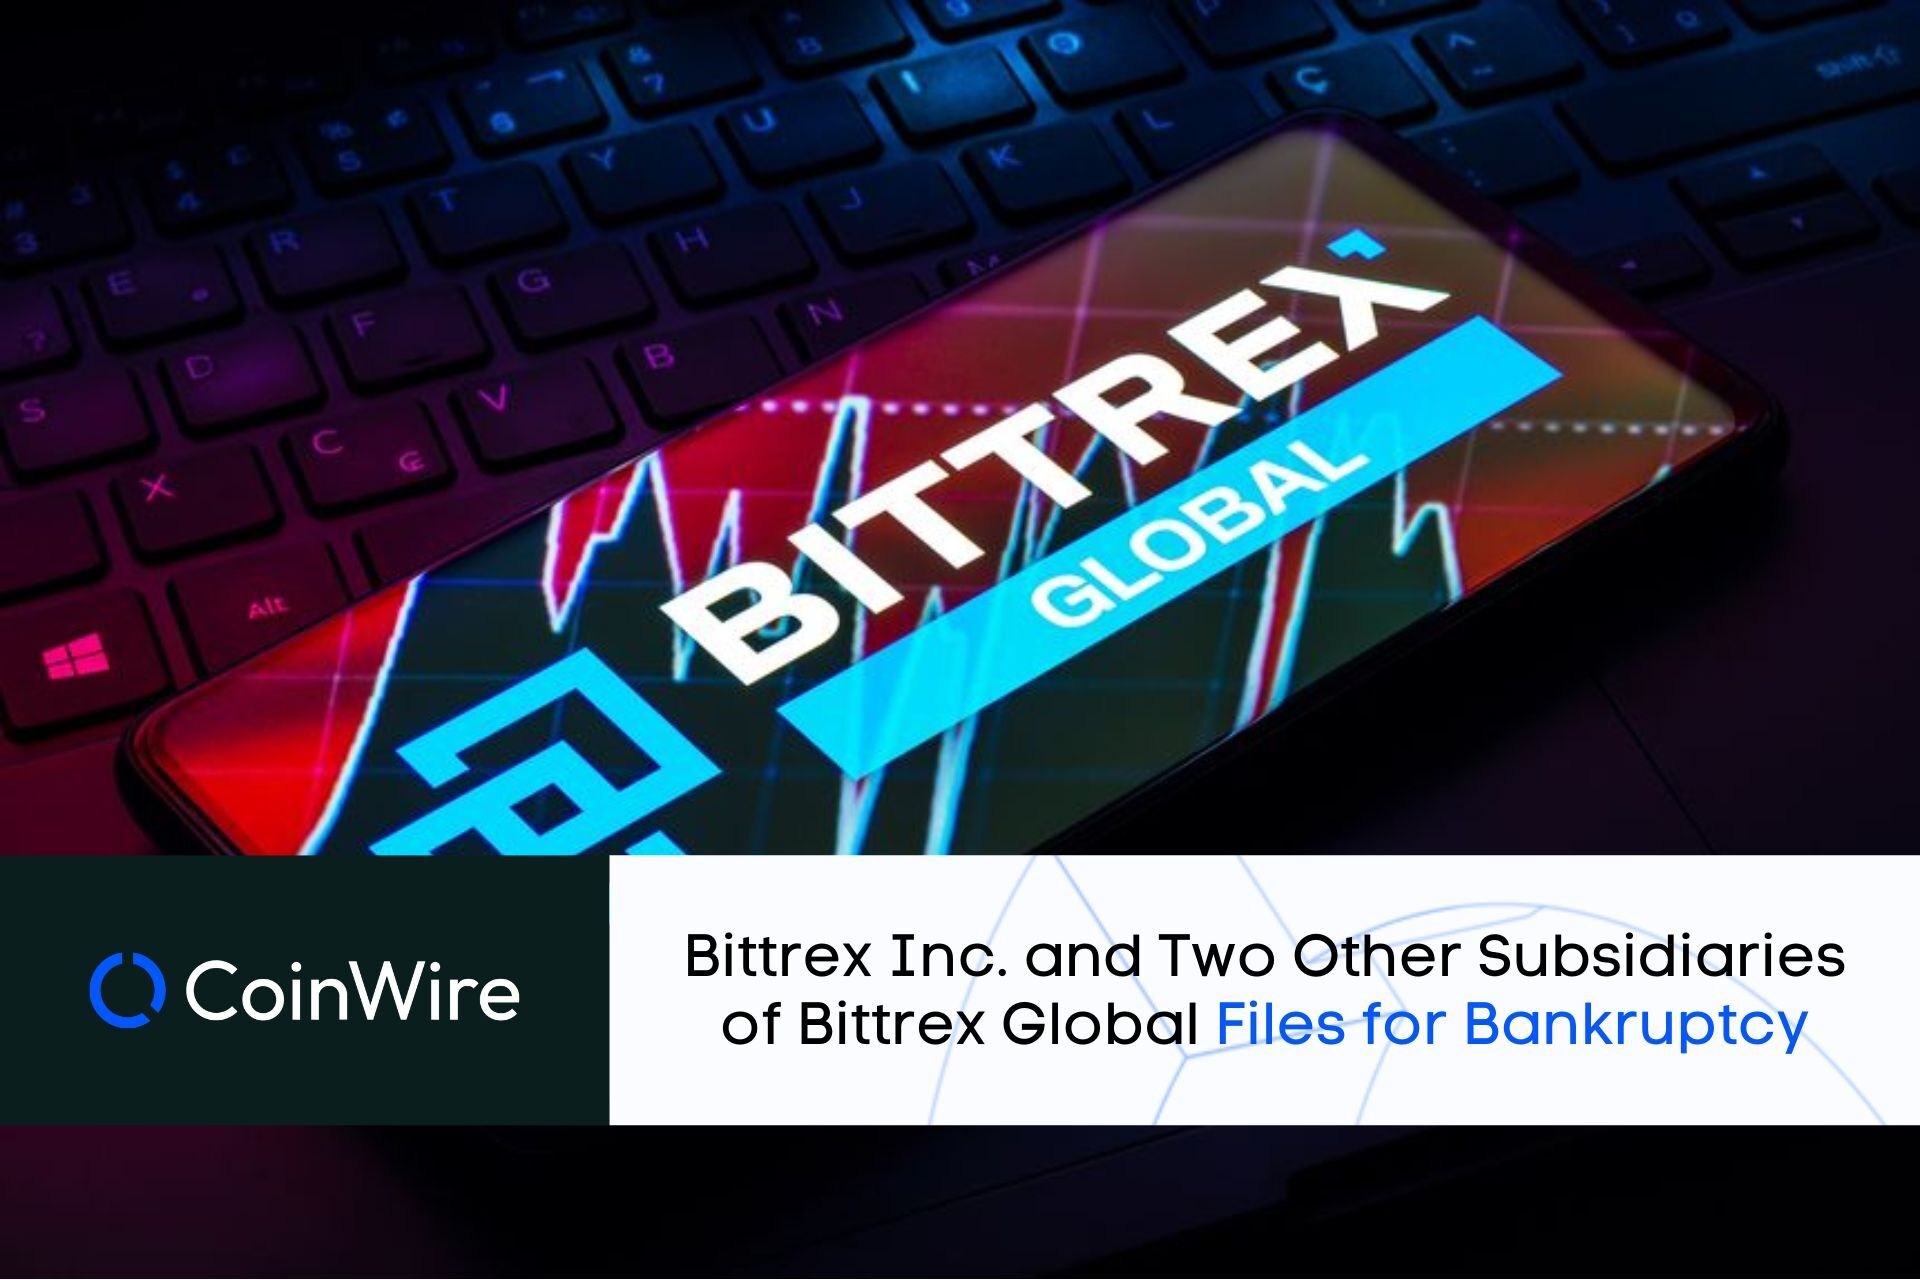 Bittrex, Inc. Statement on Chapter 11 Bankruptcy